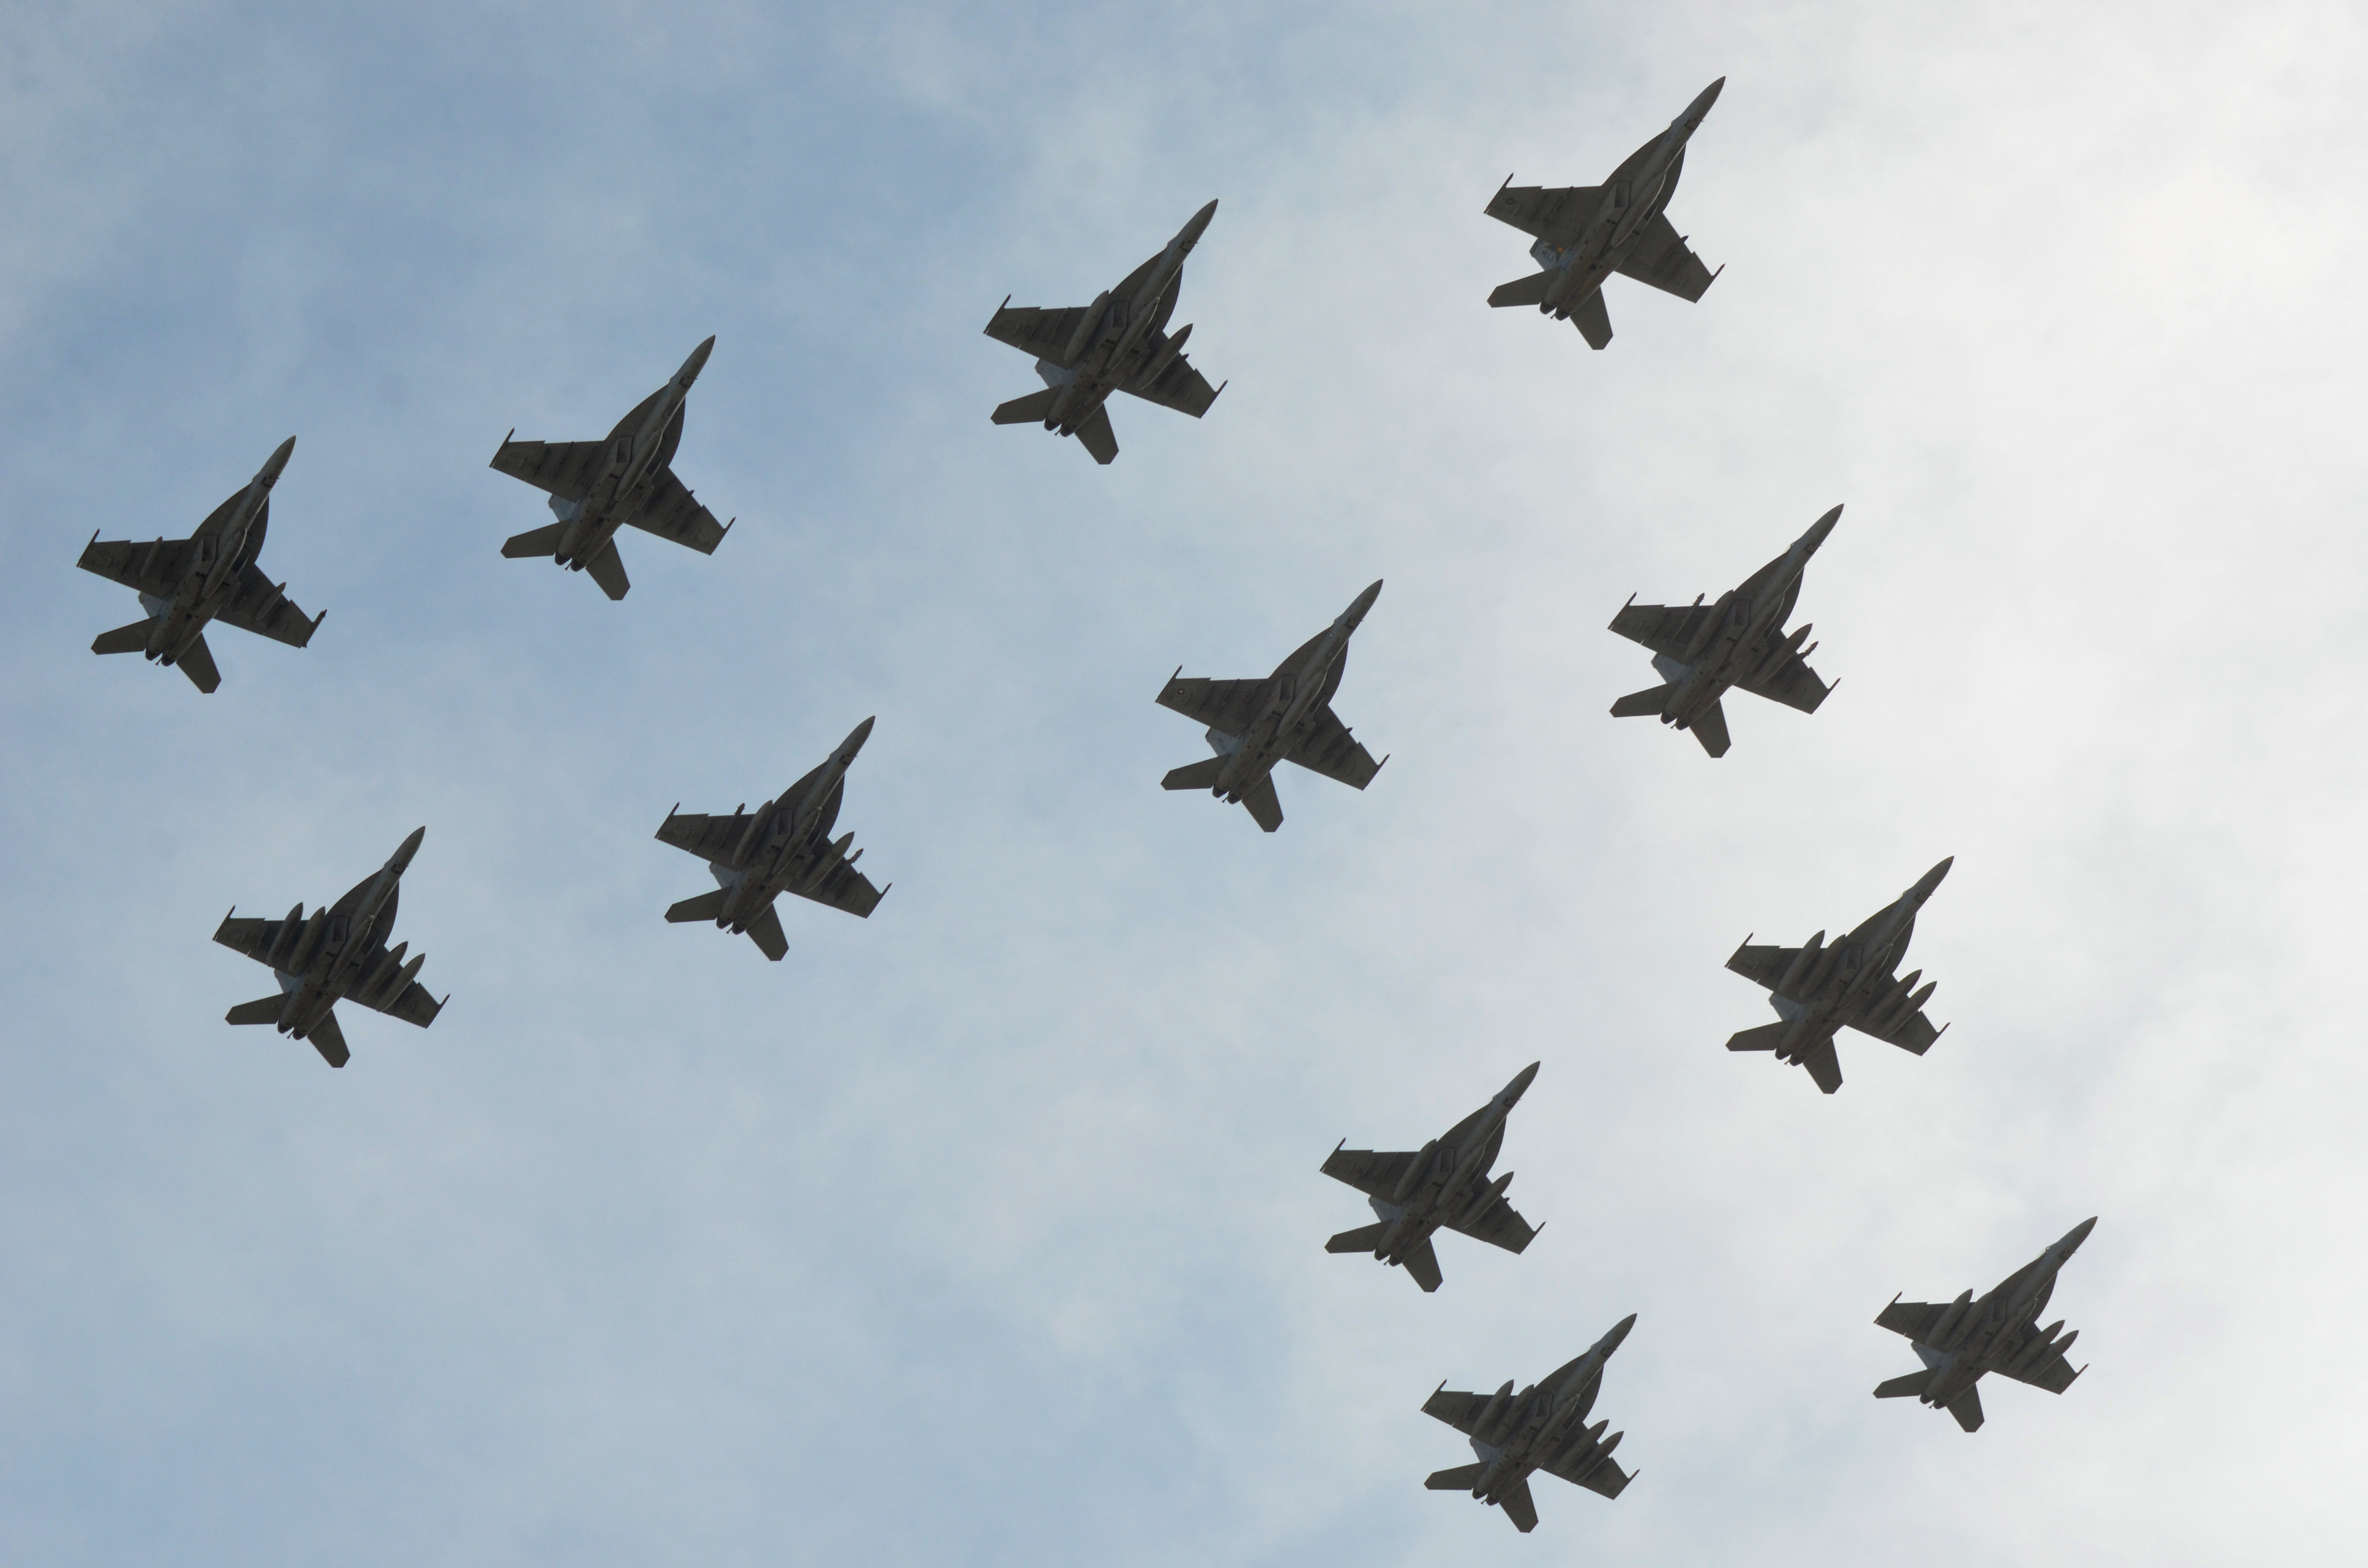 The "Gunslingers" of Strike Fighter Squadron (VFA) 105 conduct a flyover during their homecoming at Naval Air Station Oceana, Va. on April 17, 2014. US Navy Photo